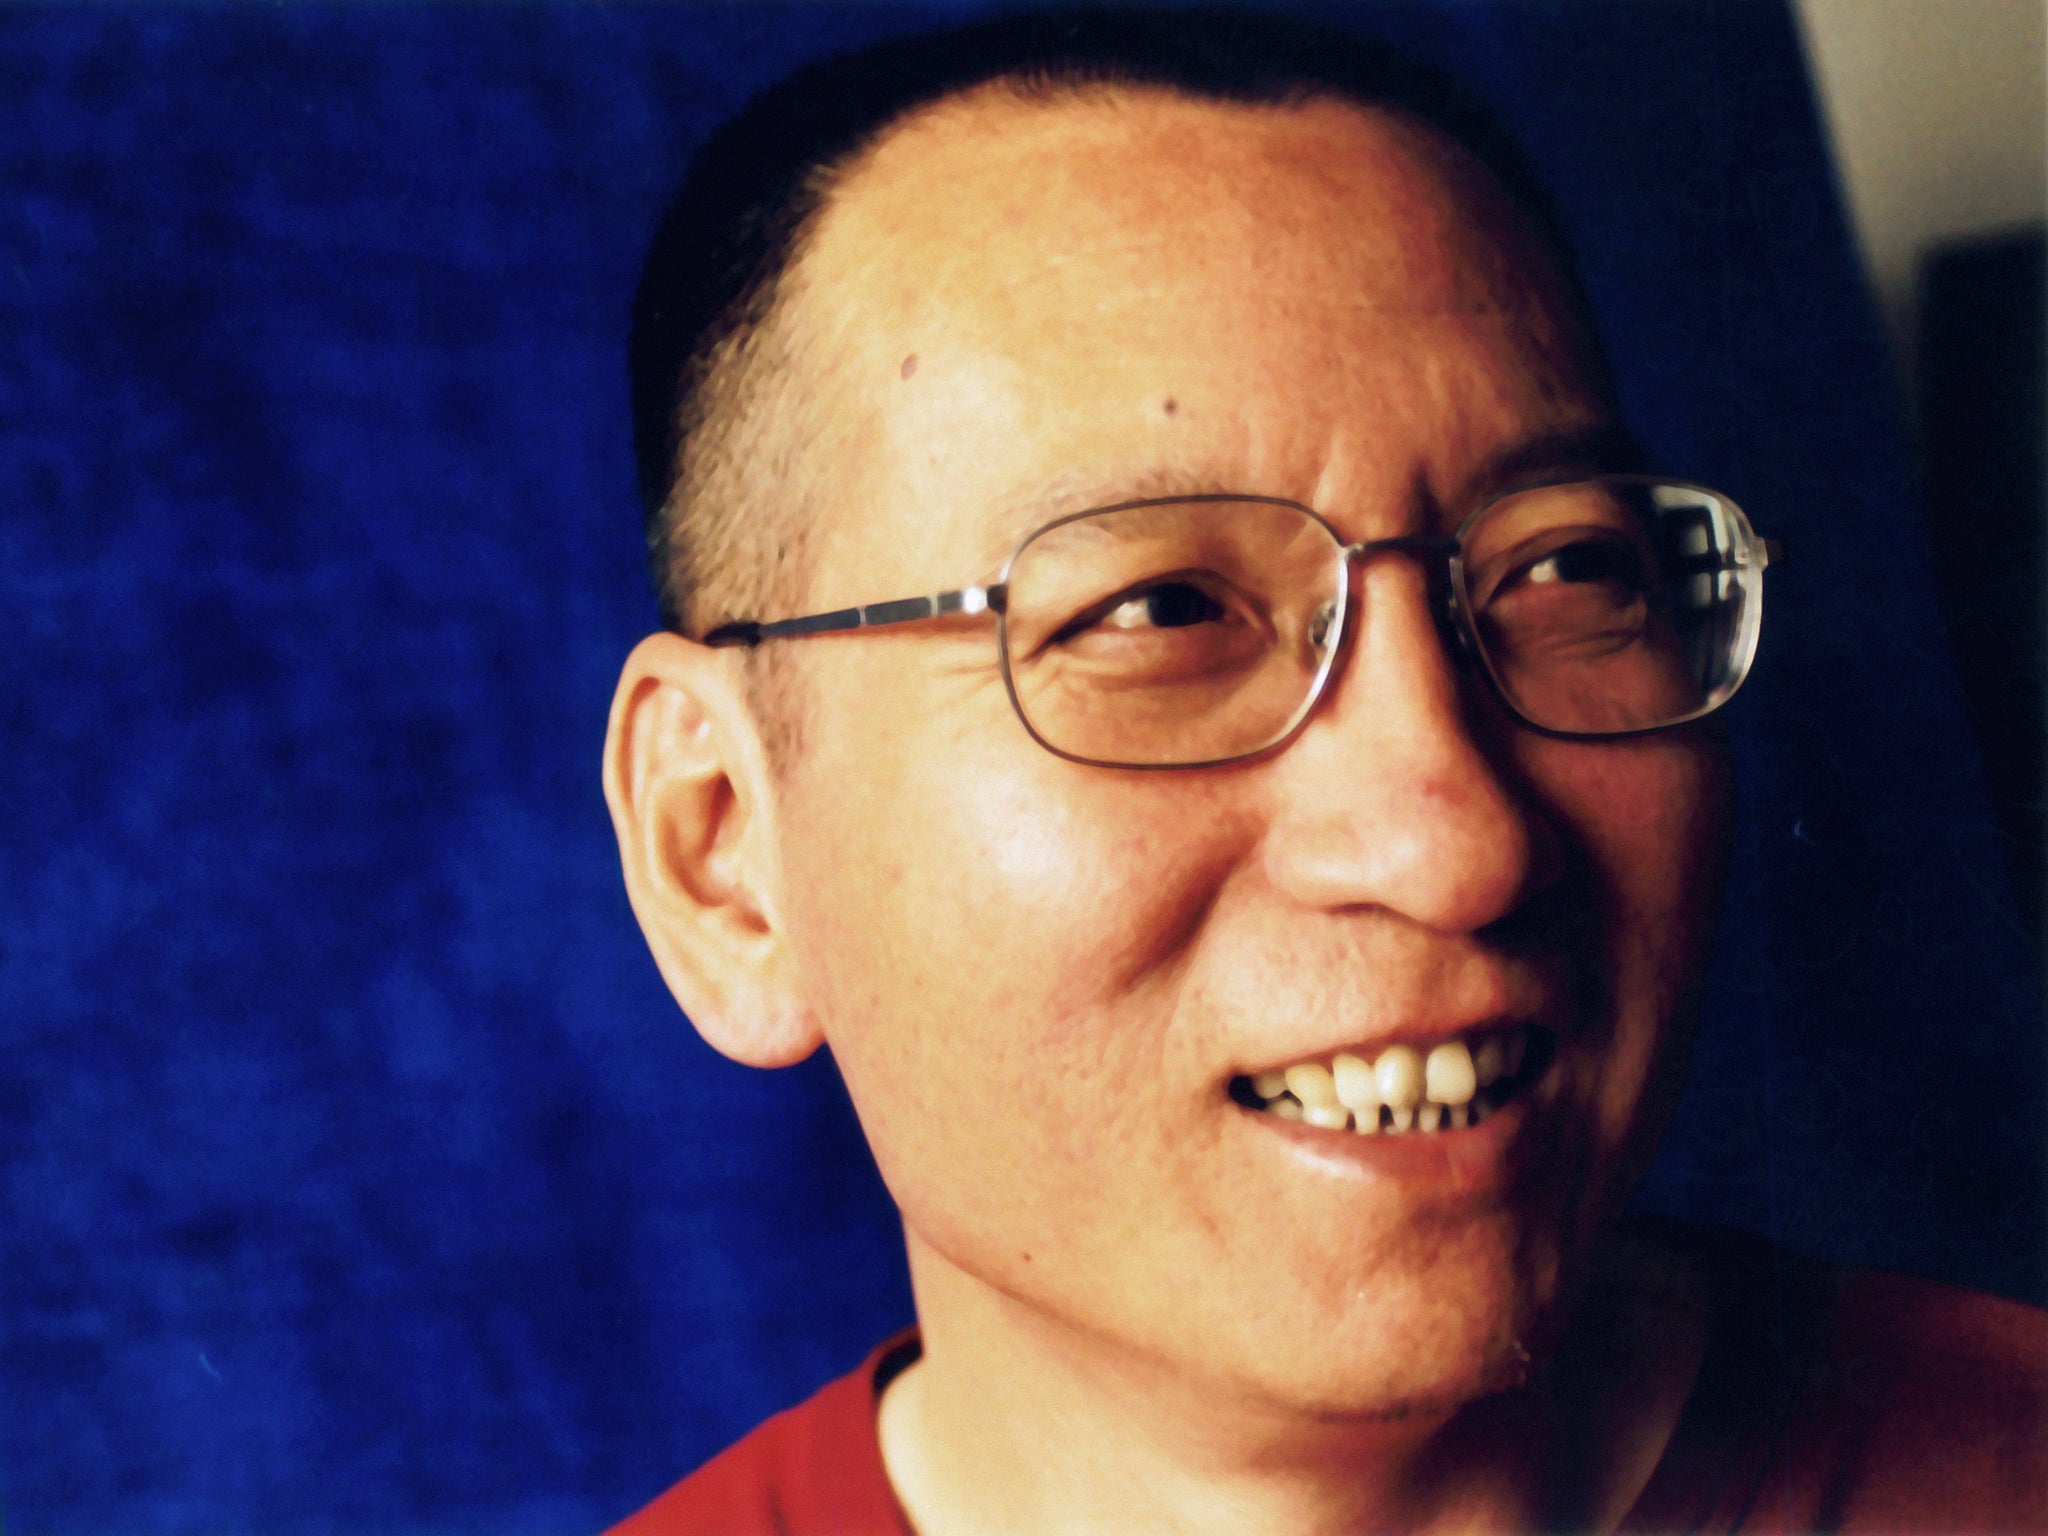 Liu Xiaobo was jailed in 2009 for his role in drafting Charter 08